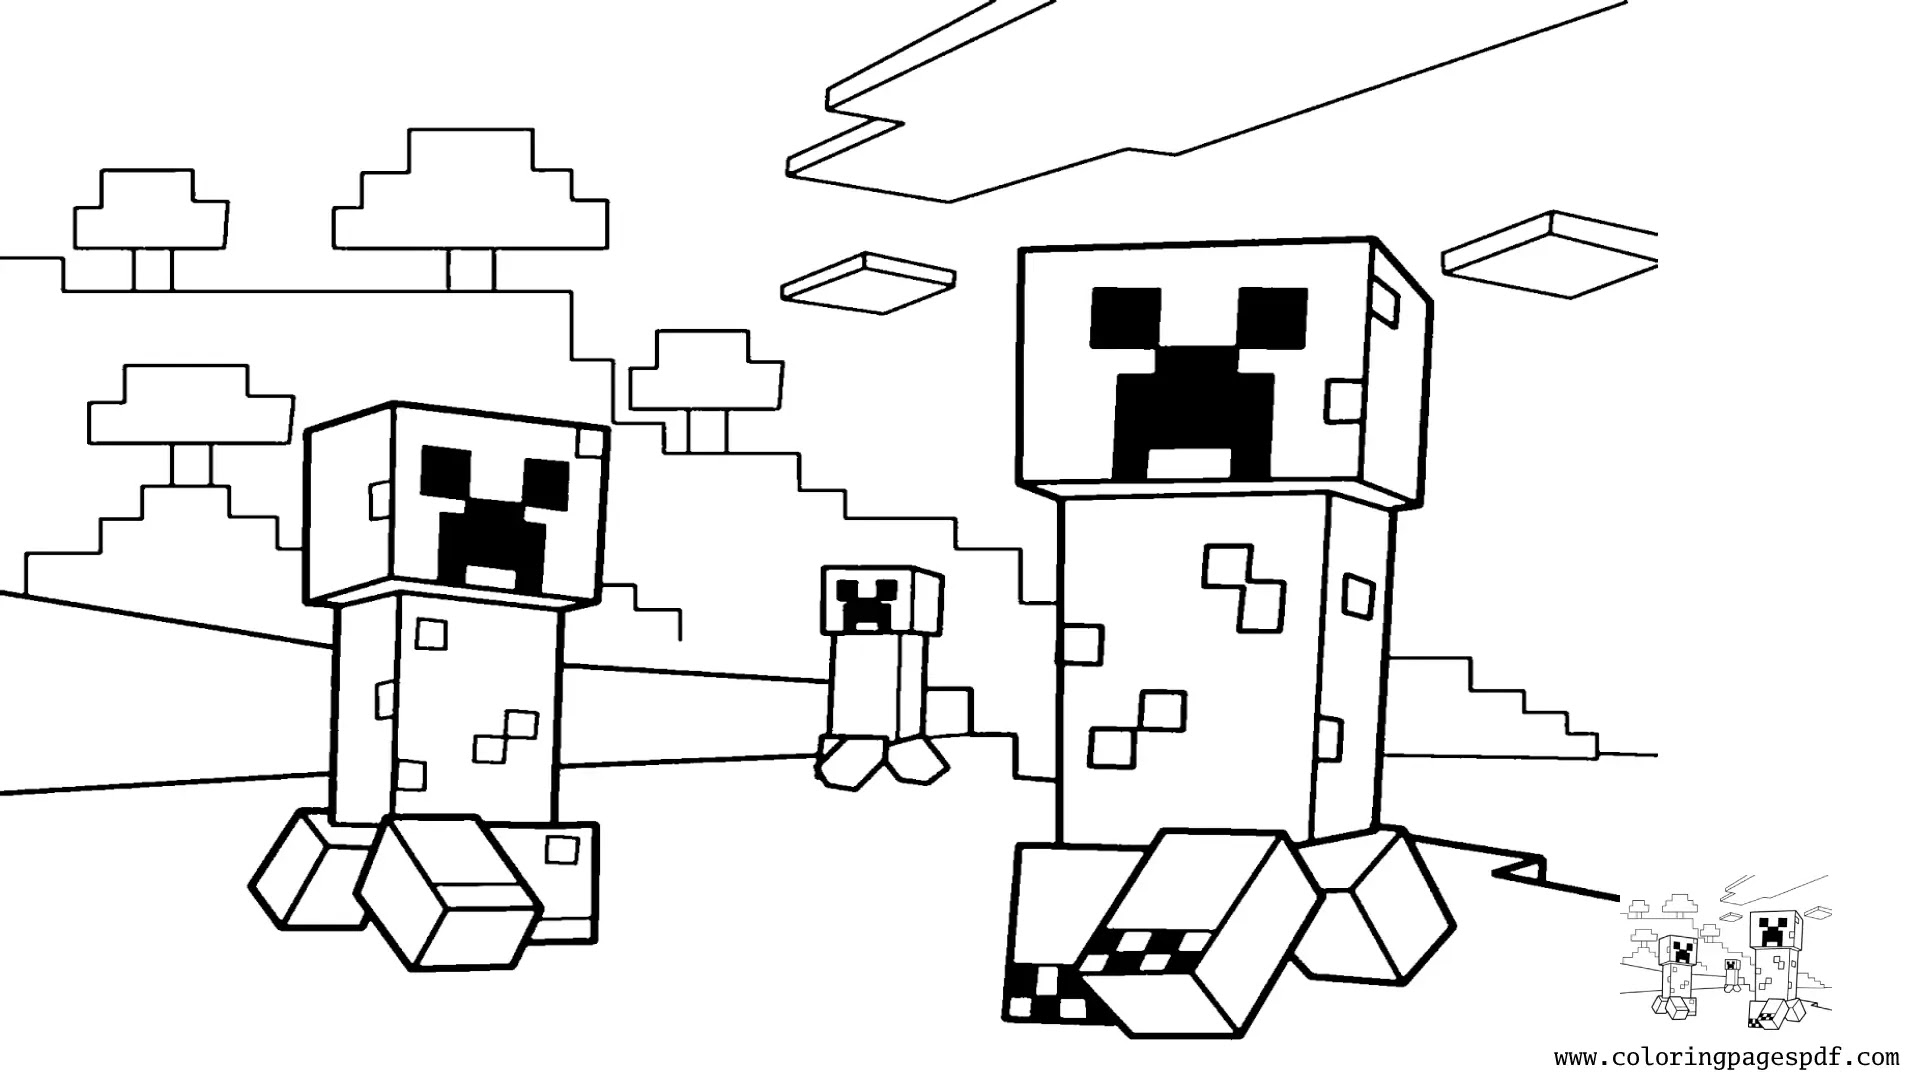 Coloring Page Of Multiple Creepers